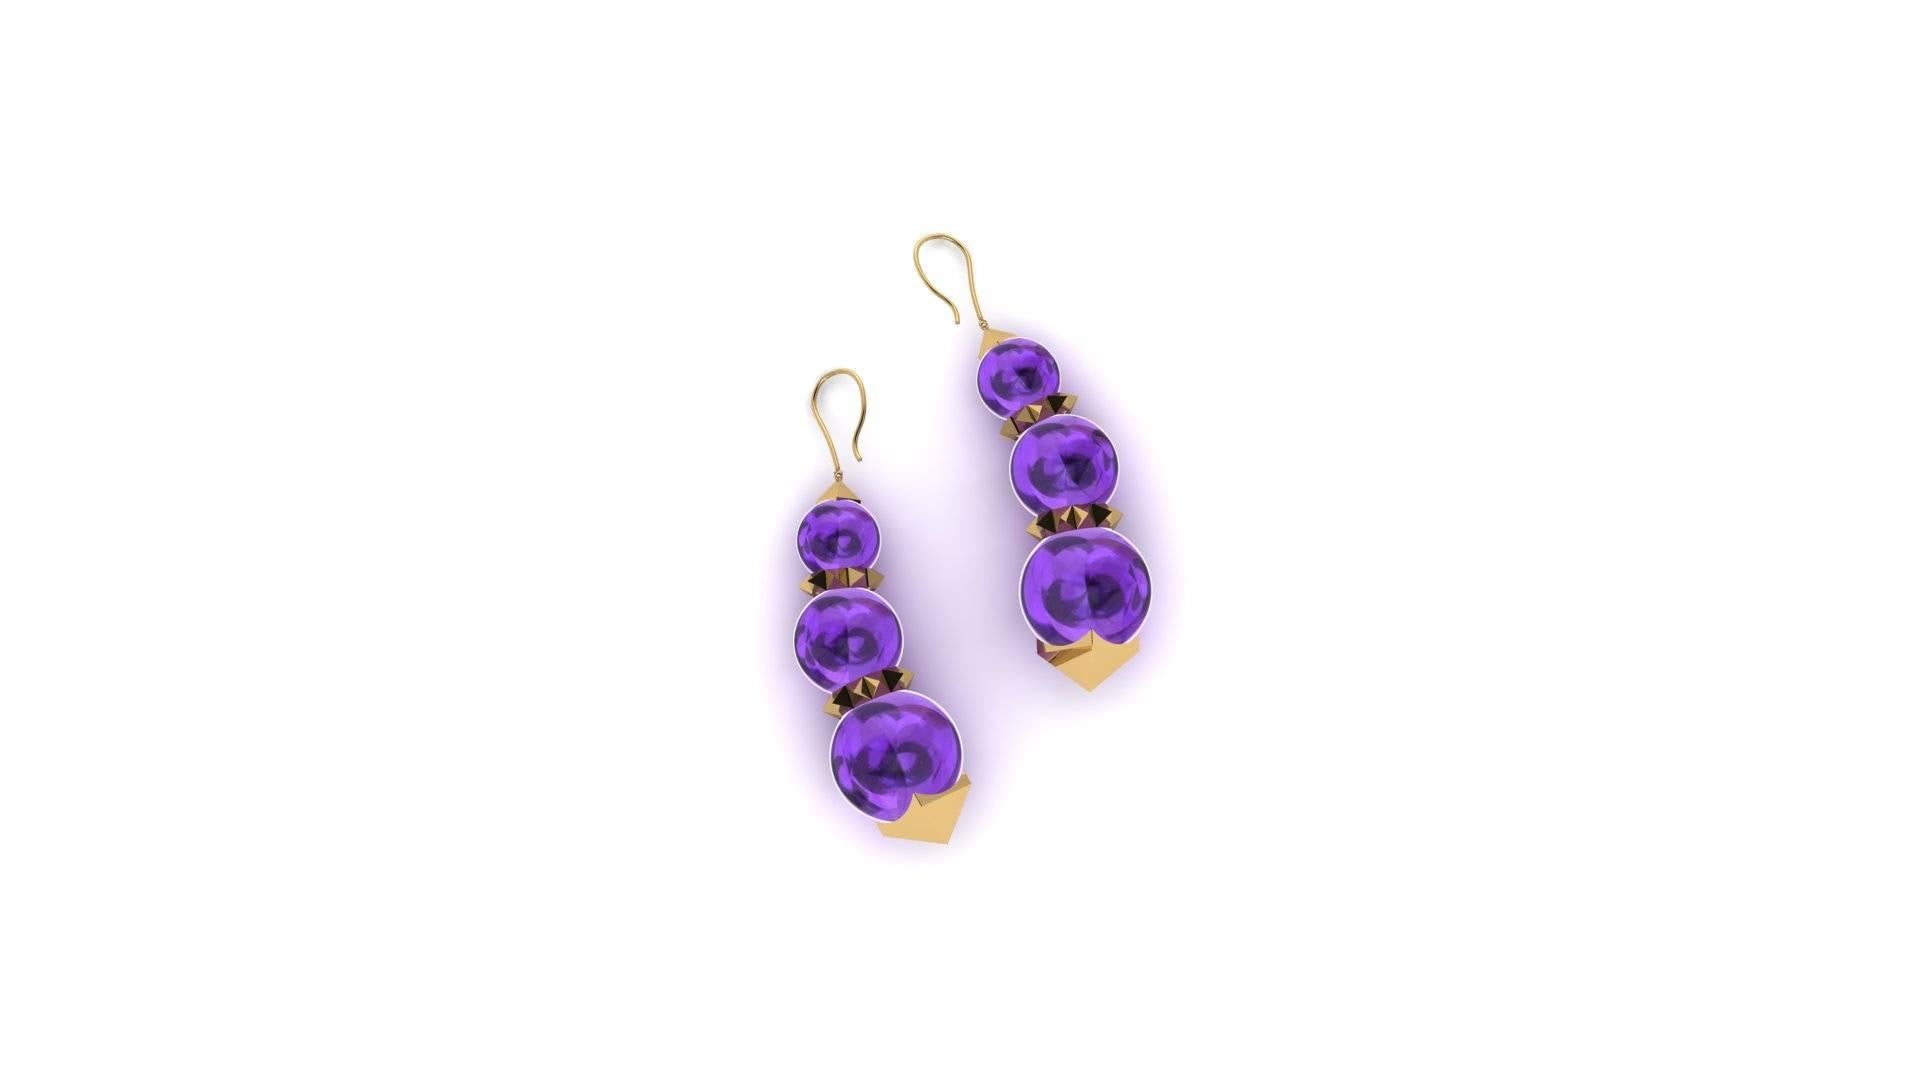 from FERRUCCI's collection Pyramid, 18k yellow gold and natural Amethyst beads earrings, hand made in New York.

Elegant and fashionable, a stunning spring and summer look for the innate classy taste of a strong woman.